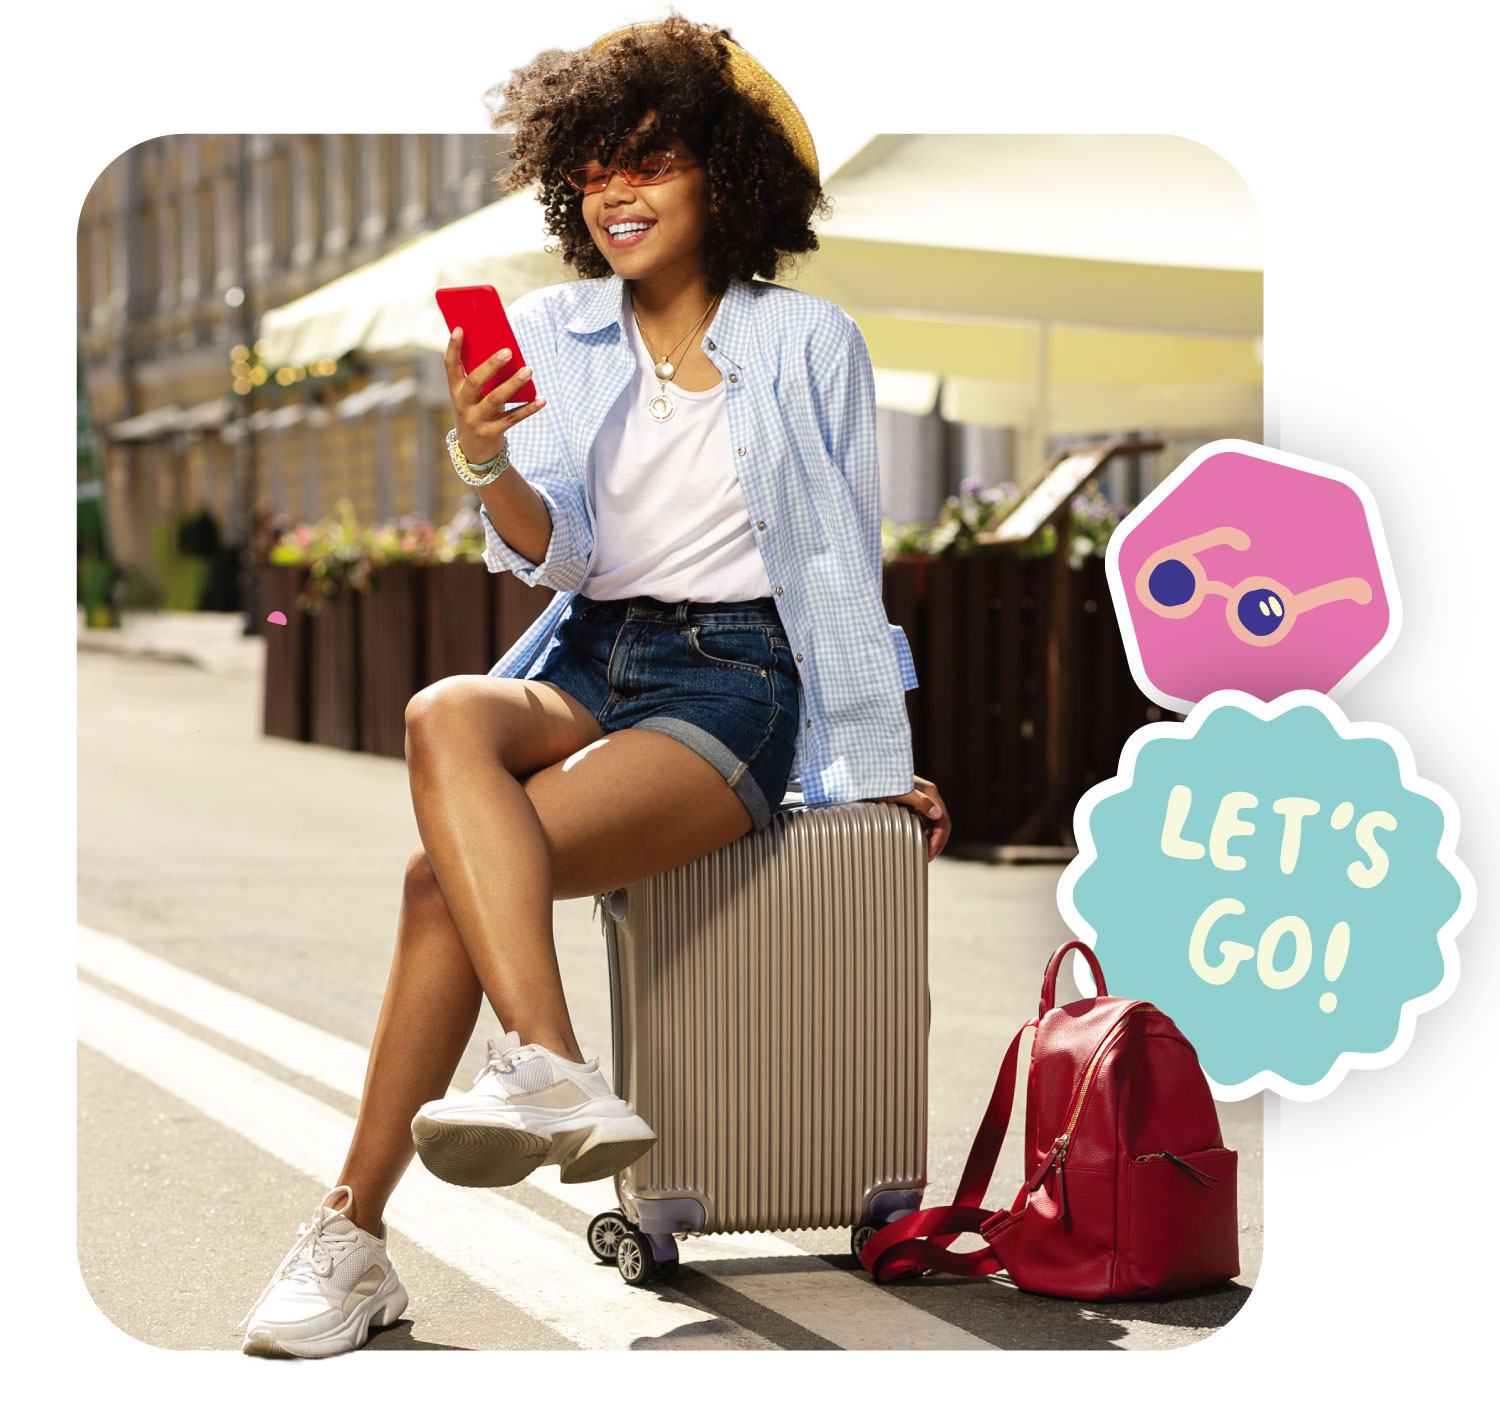 Young woman sitting on her suitcase on her mobile phone with text saying 'Let's go!'.